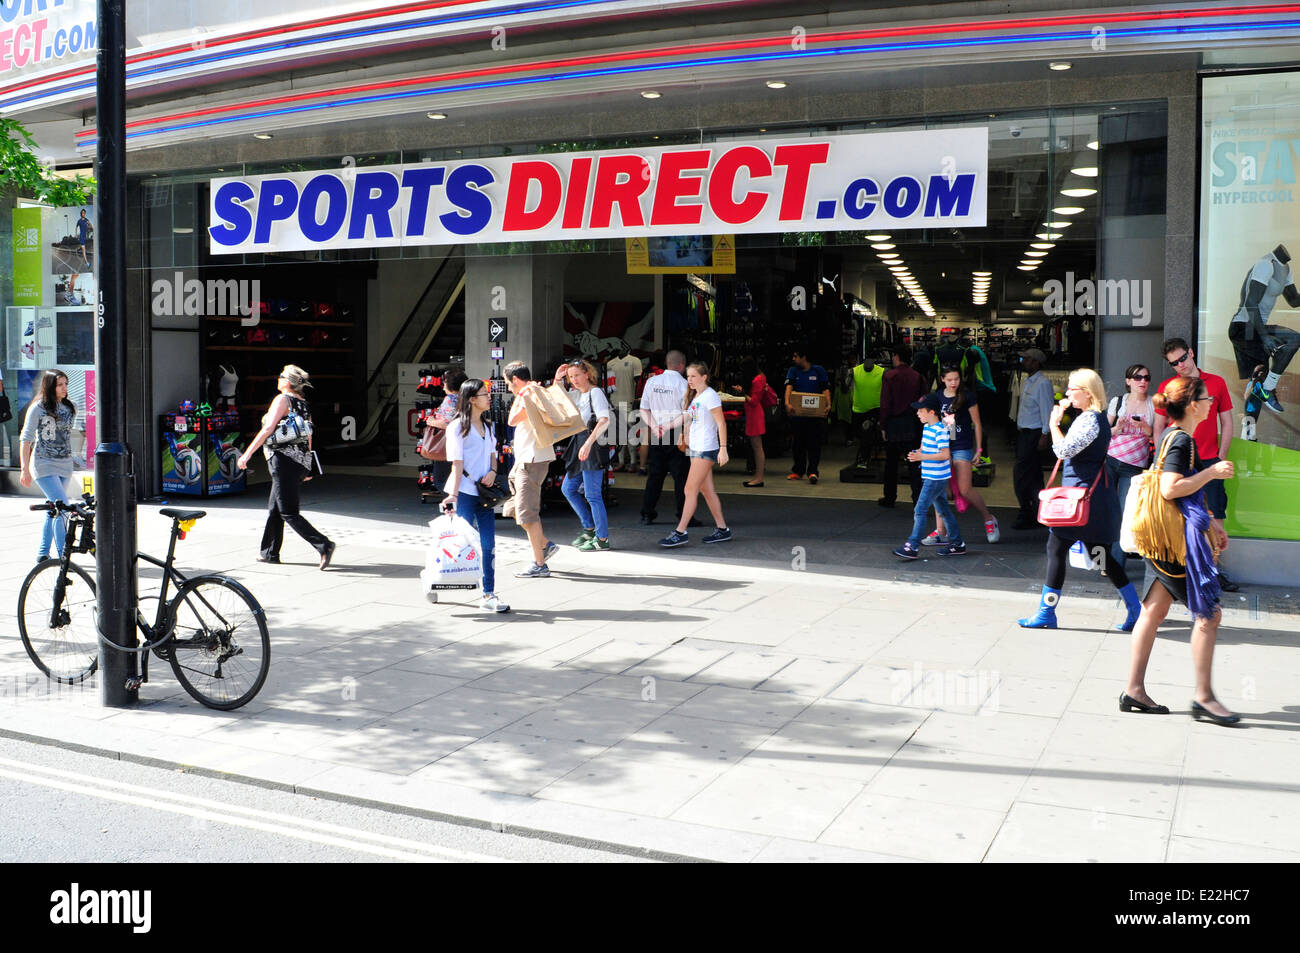 The new sports direct shop on Oxford Street, London, UK Stock Photo